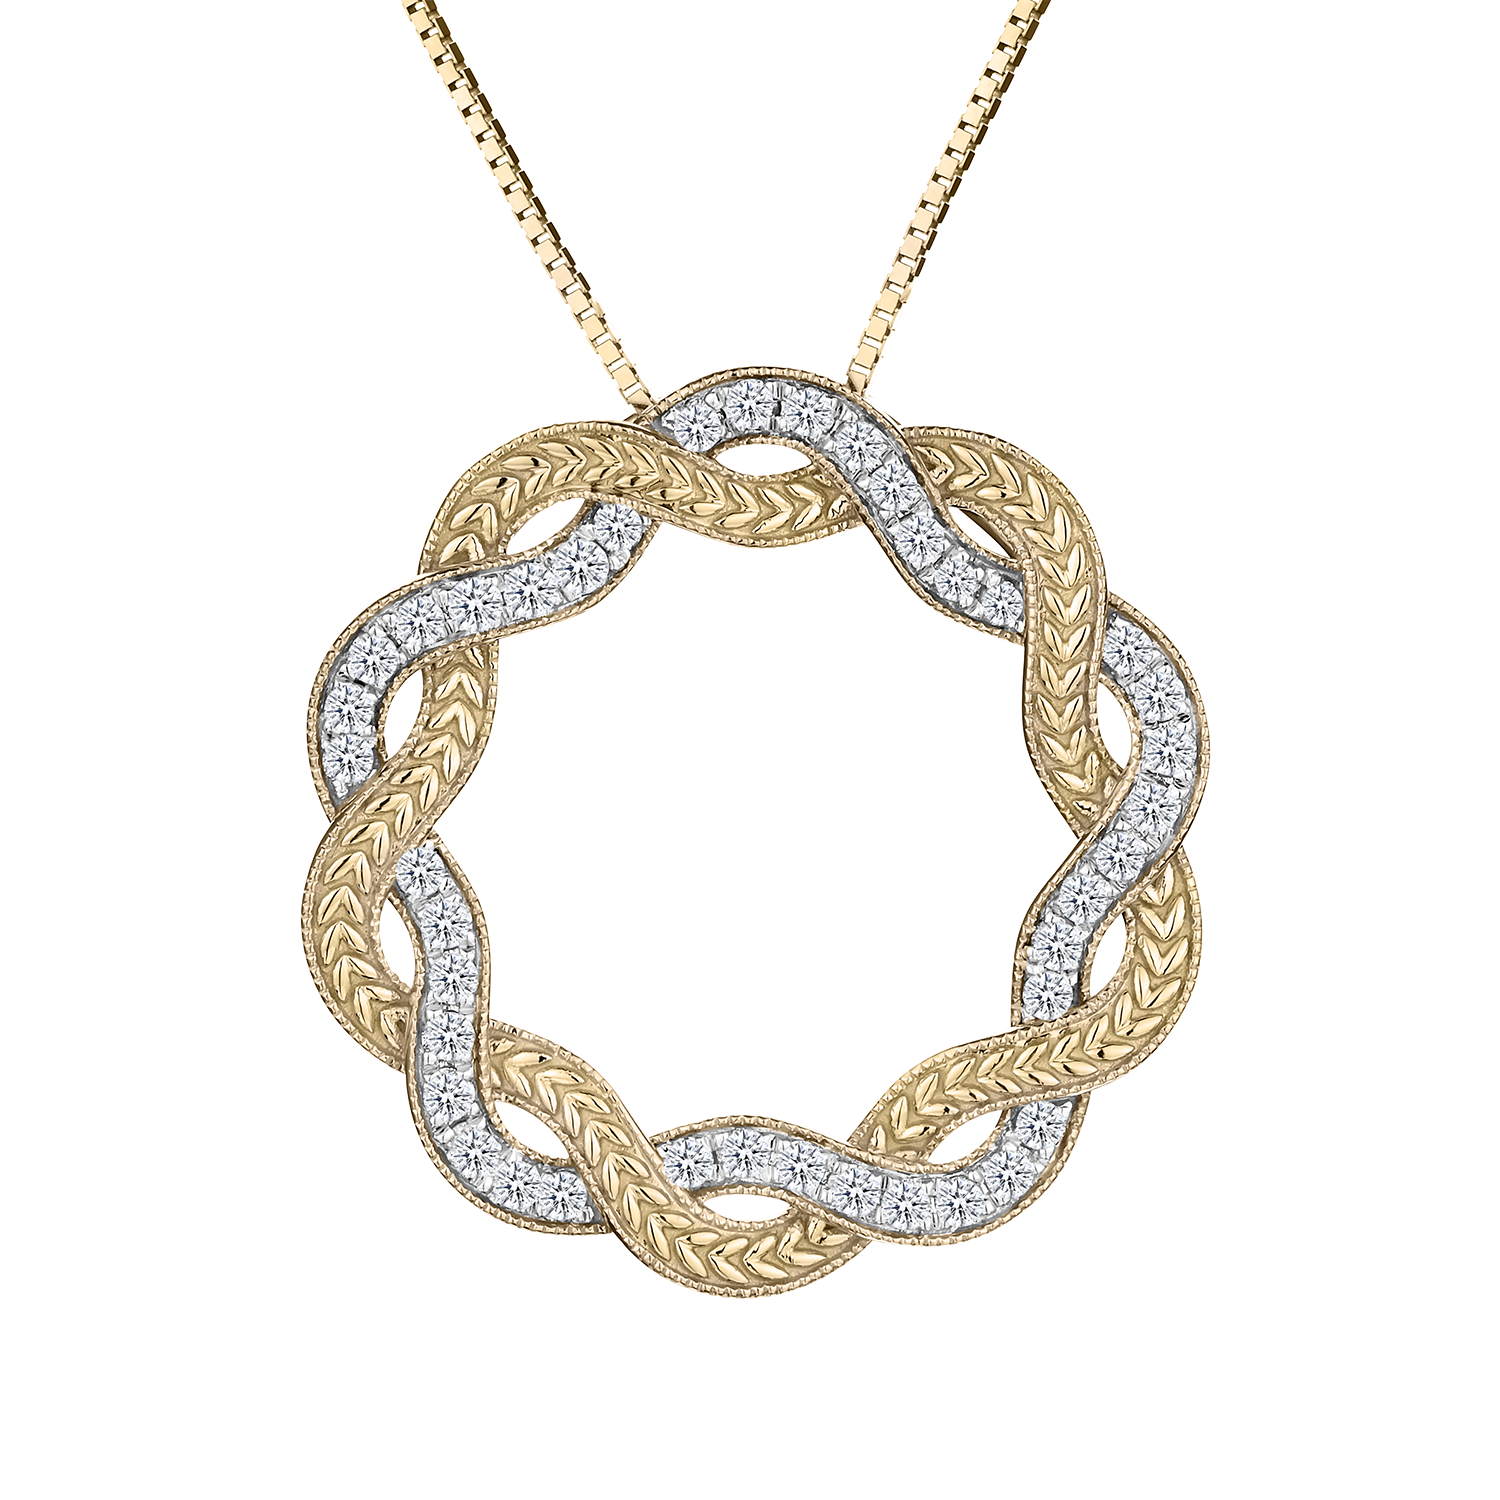 .40 Carat Diamond Large "Love Weave" Pendant,  10kt Yellow Gold. Necklaces and Pendants. Griffin Jewellery Designs. 